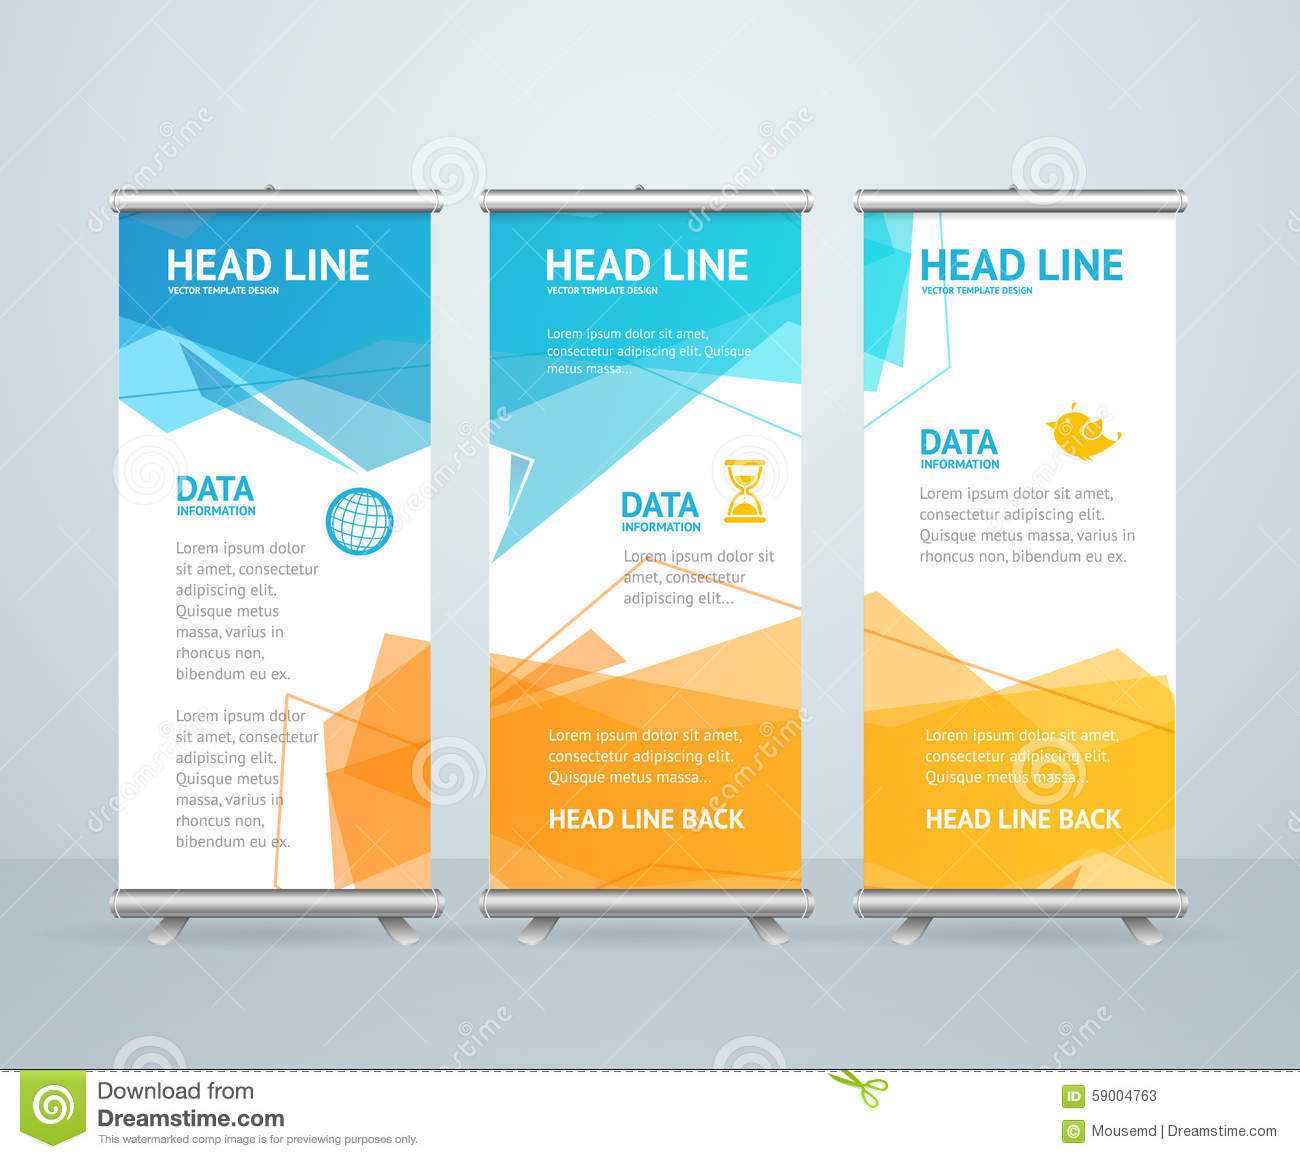 How To Design A Pop Up Banner – Yeppe In Pop Up Banner Design Template